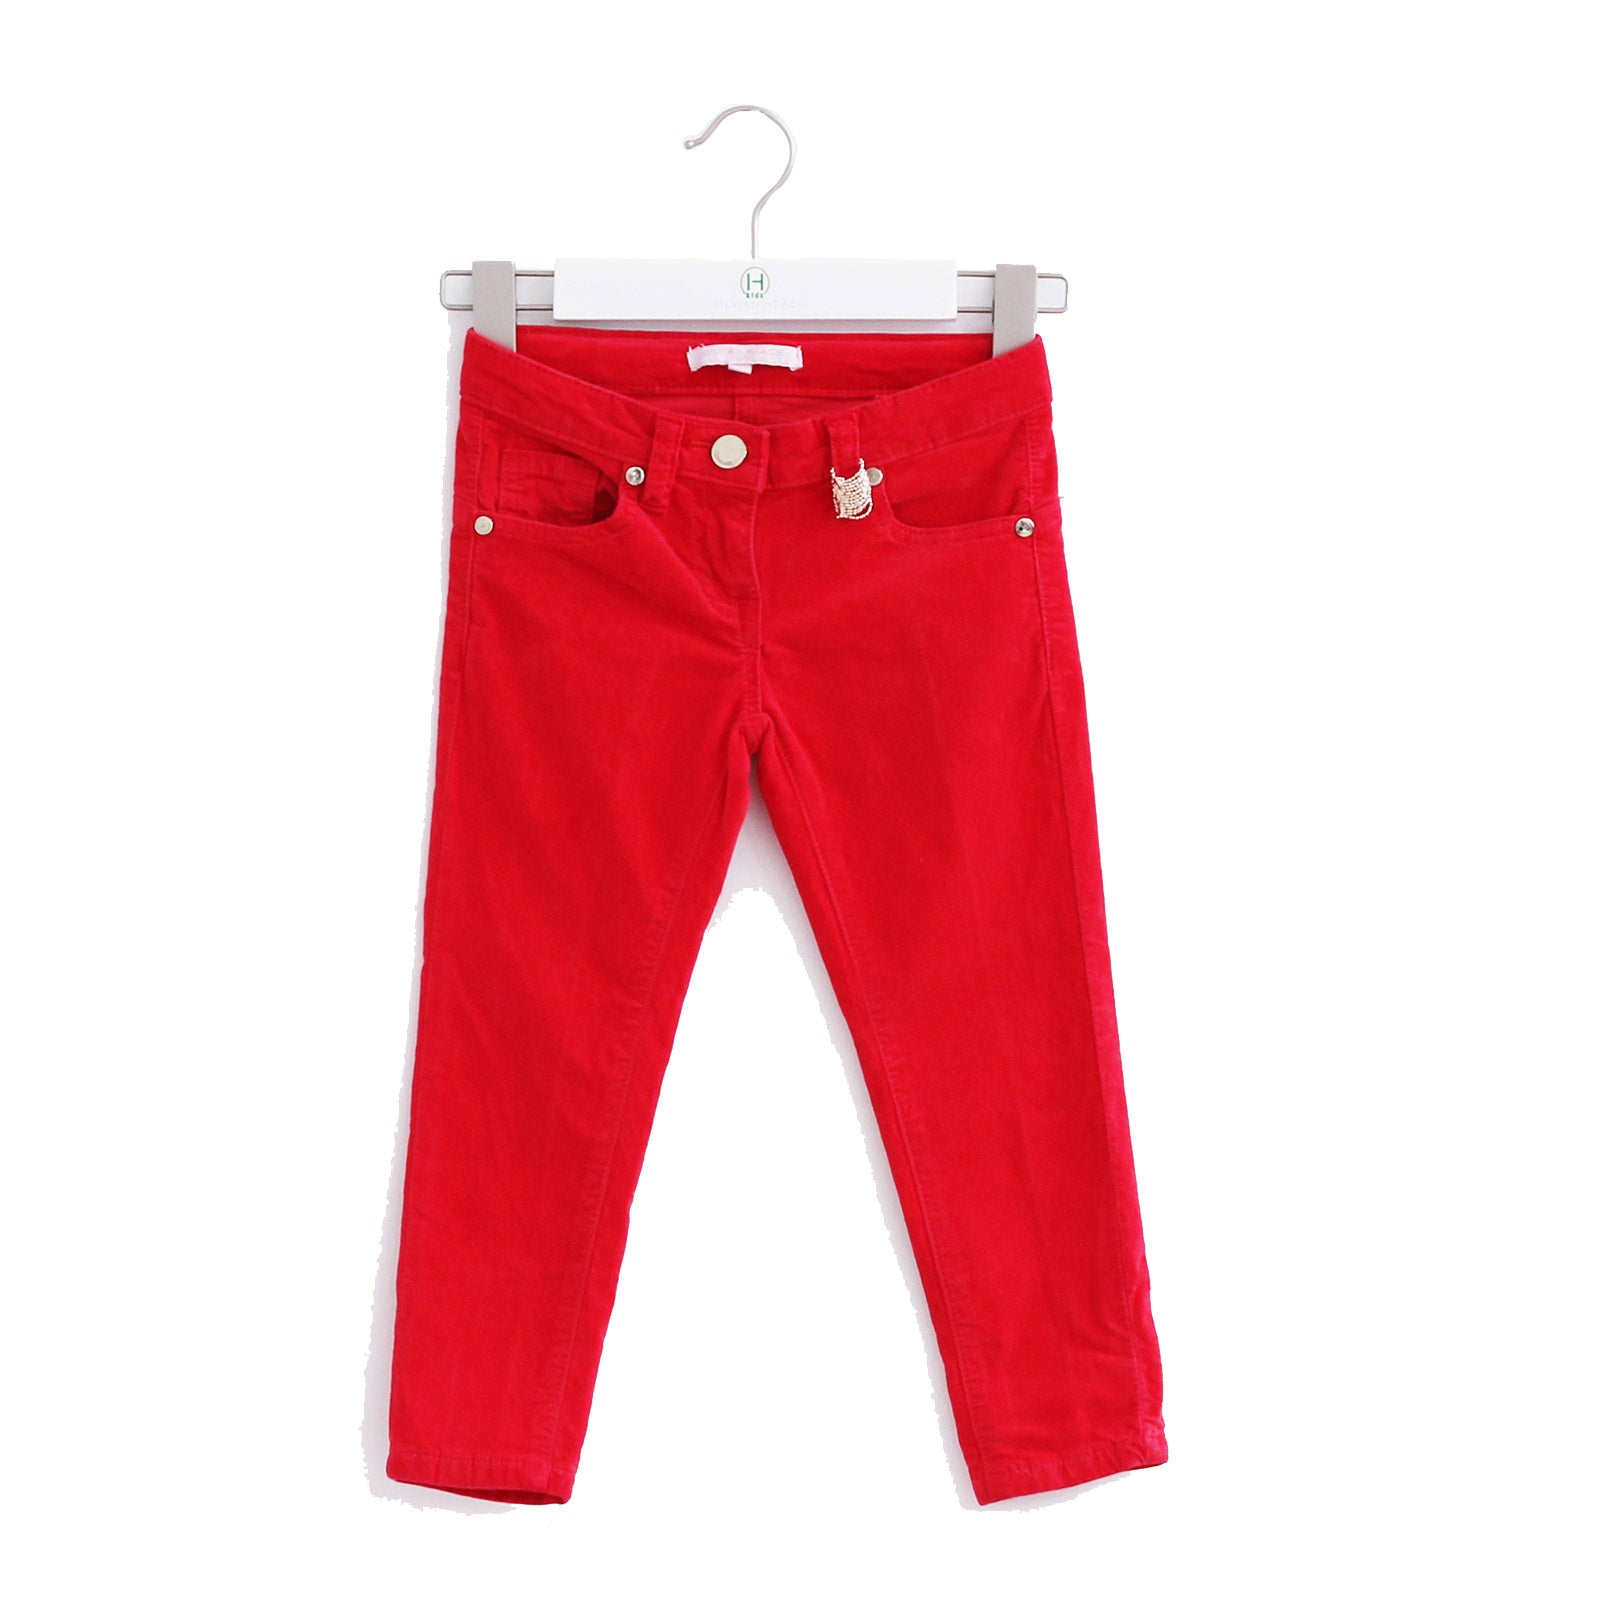 
  Moleskin pants from the Silvian Heach Kids clothing line, model
  five pockets with adjustable...